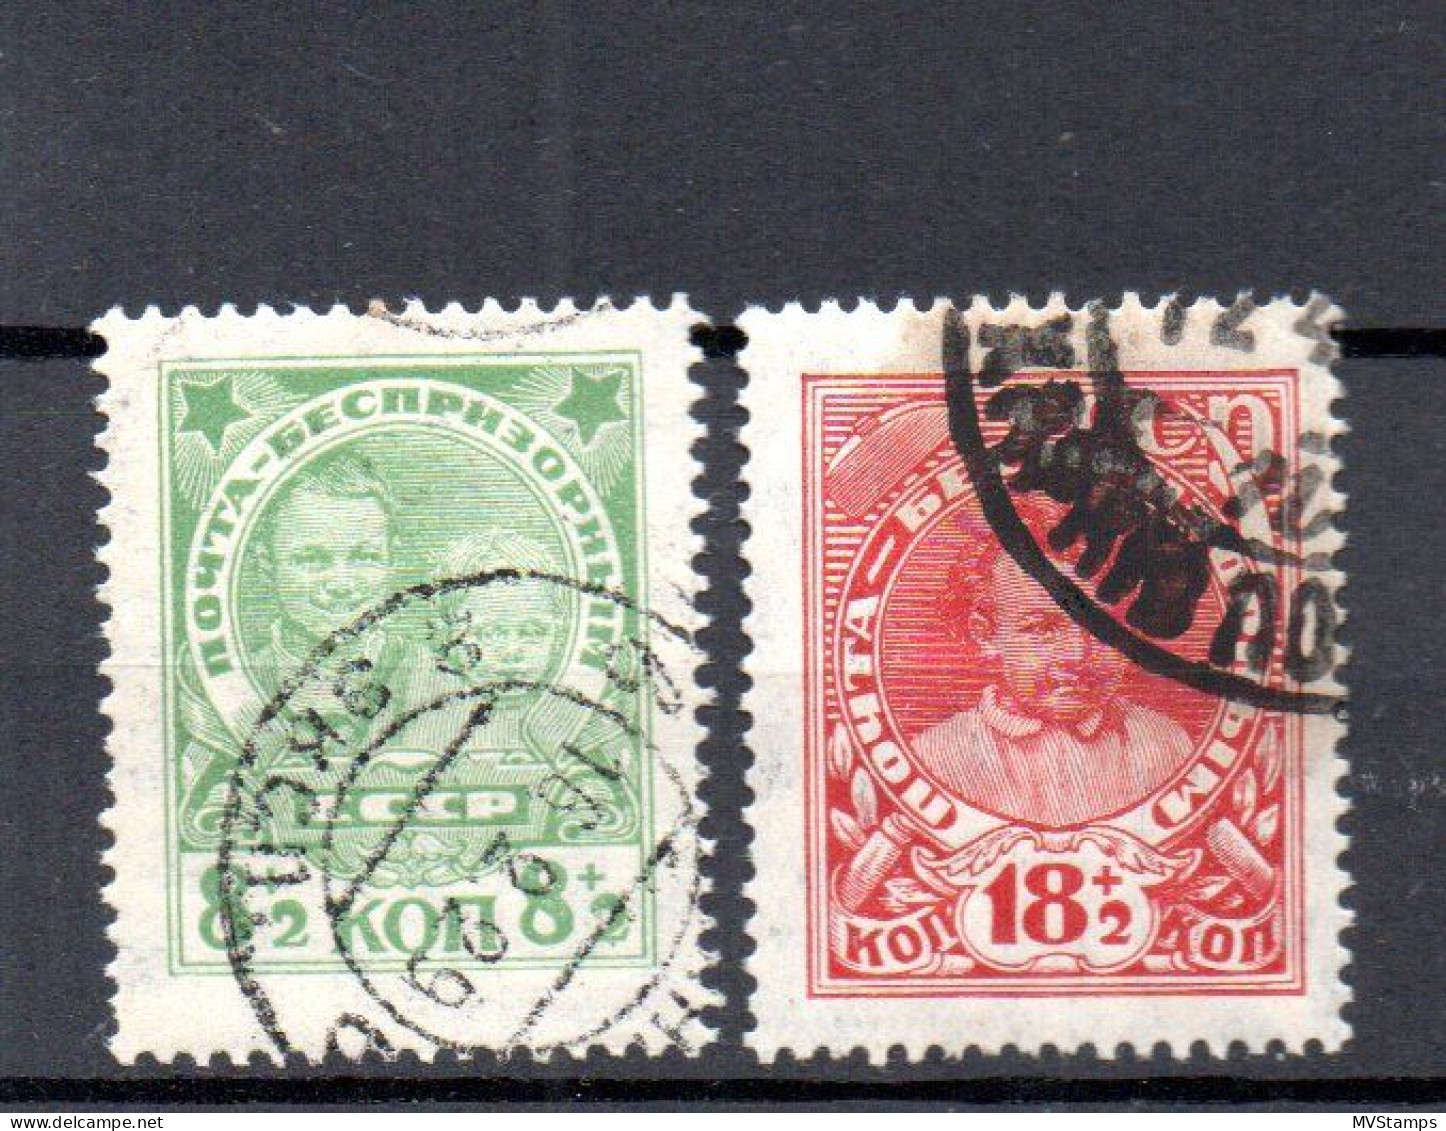 Russia 1927 Old Set Children Help Stamps (Michel 315/16) Nice Used - Used Stamps